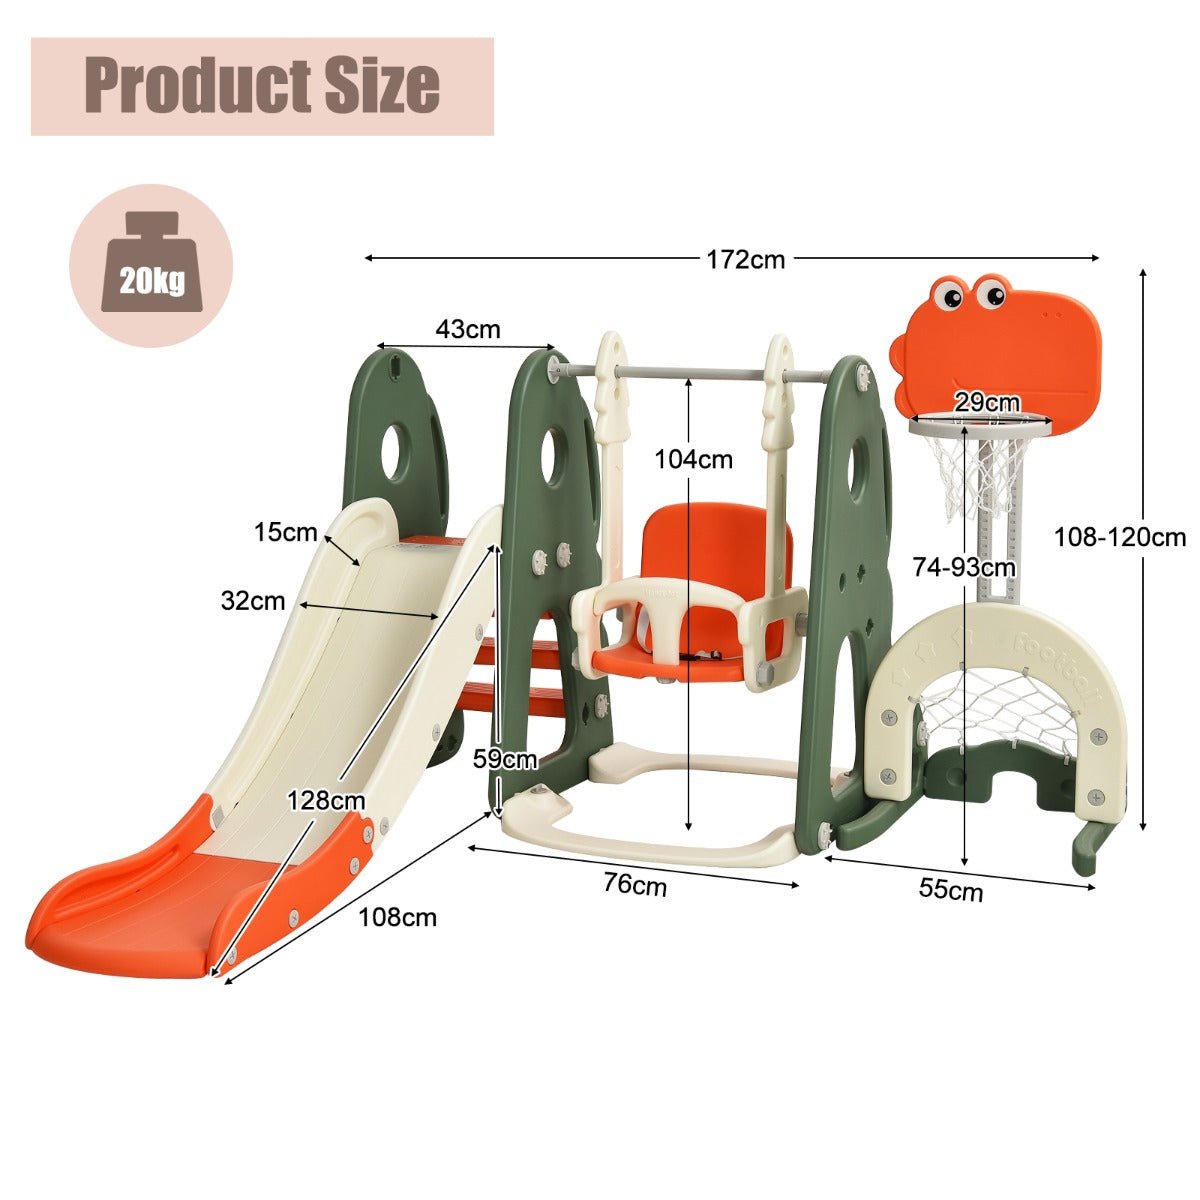 6-in-1 Kids Playset: Climber, Slide, and Basketball Hoop Excitement